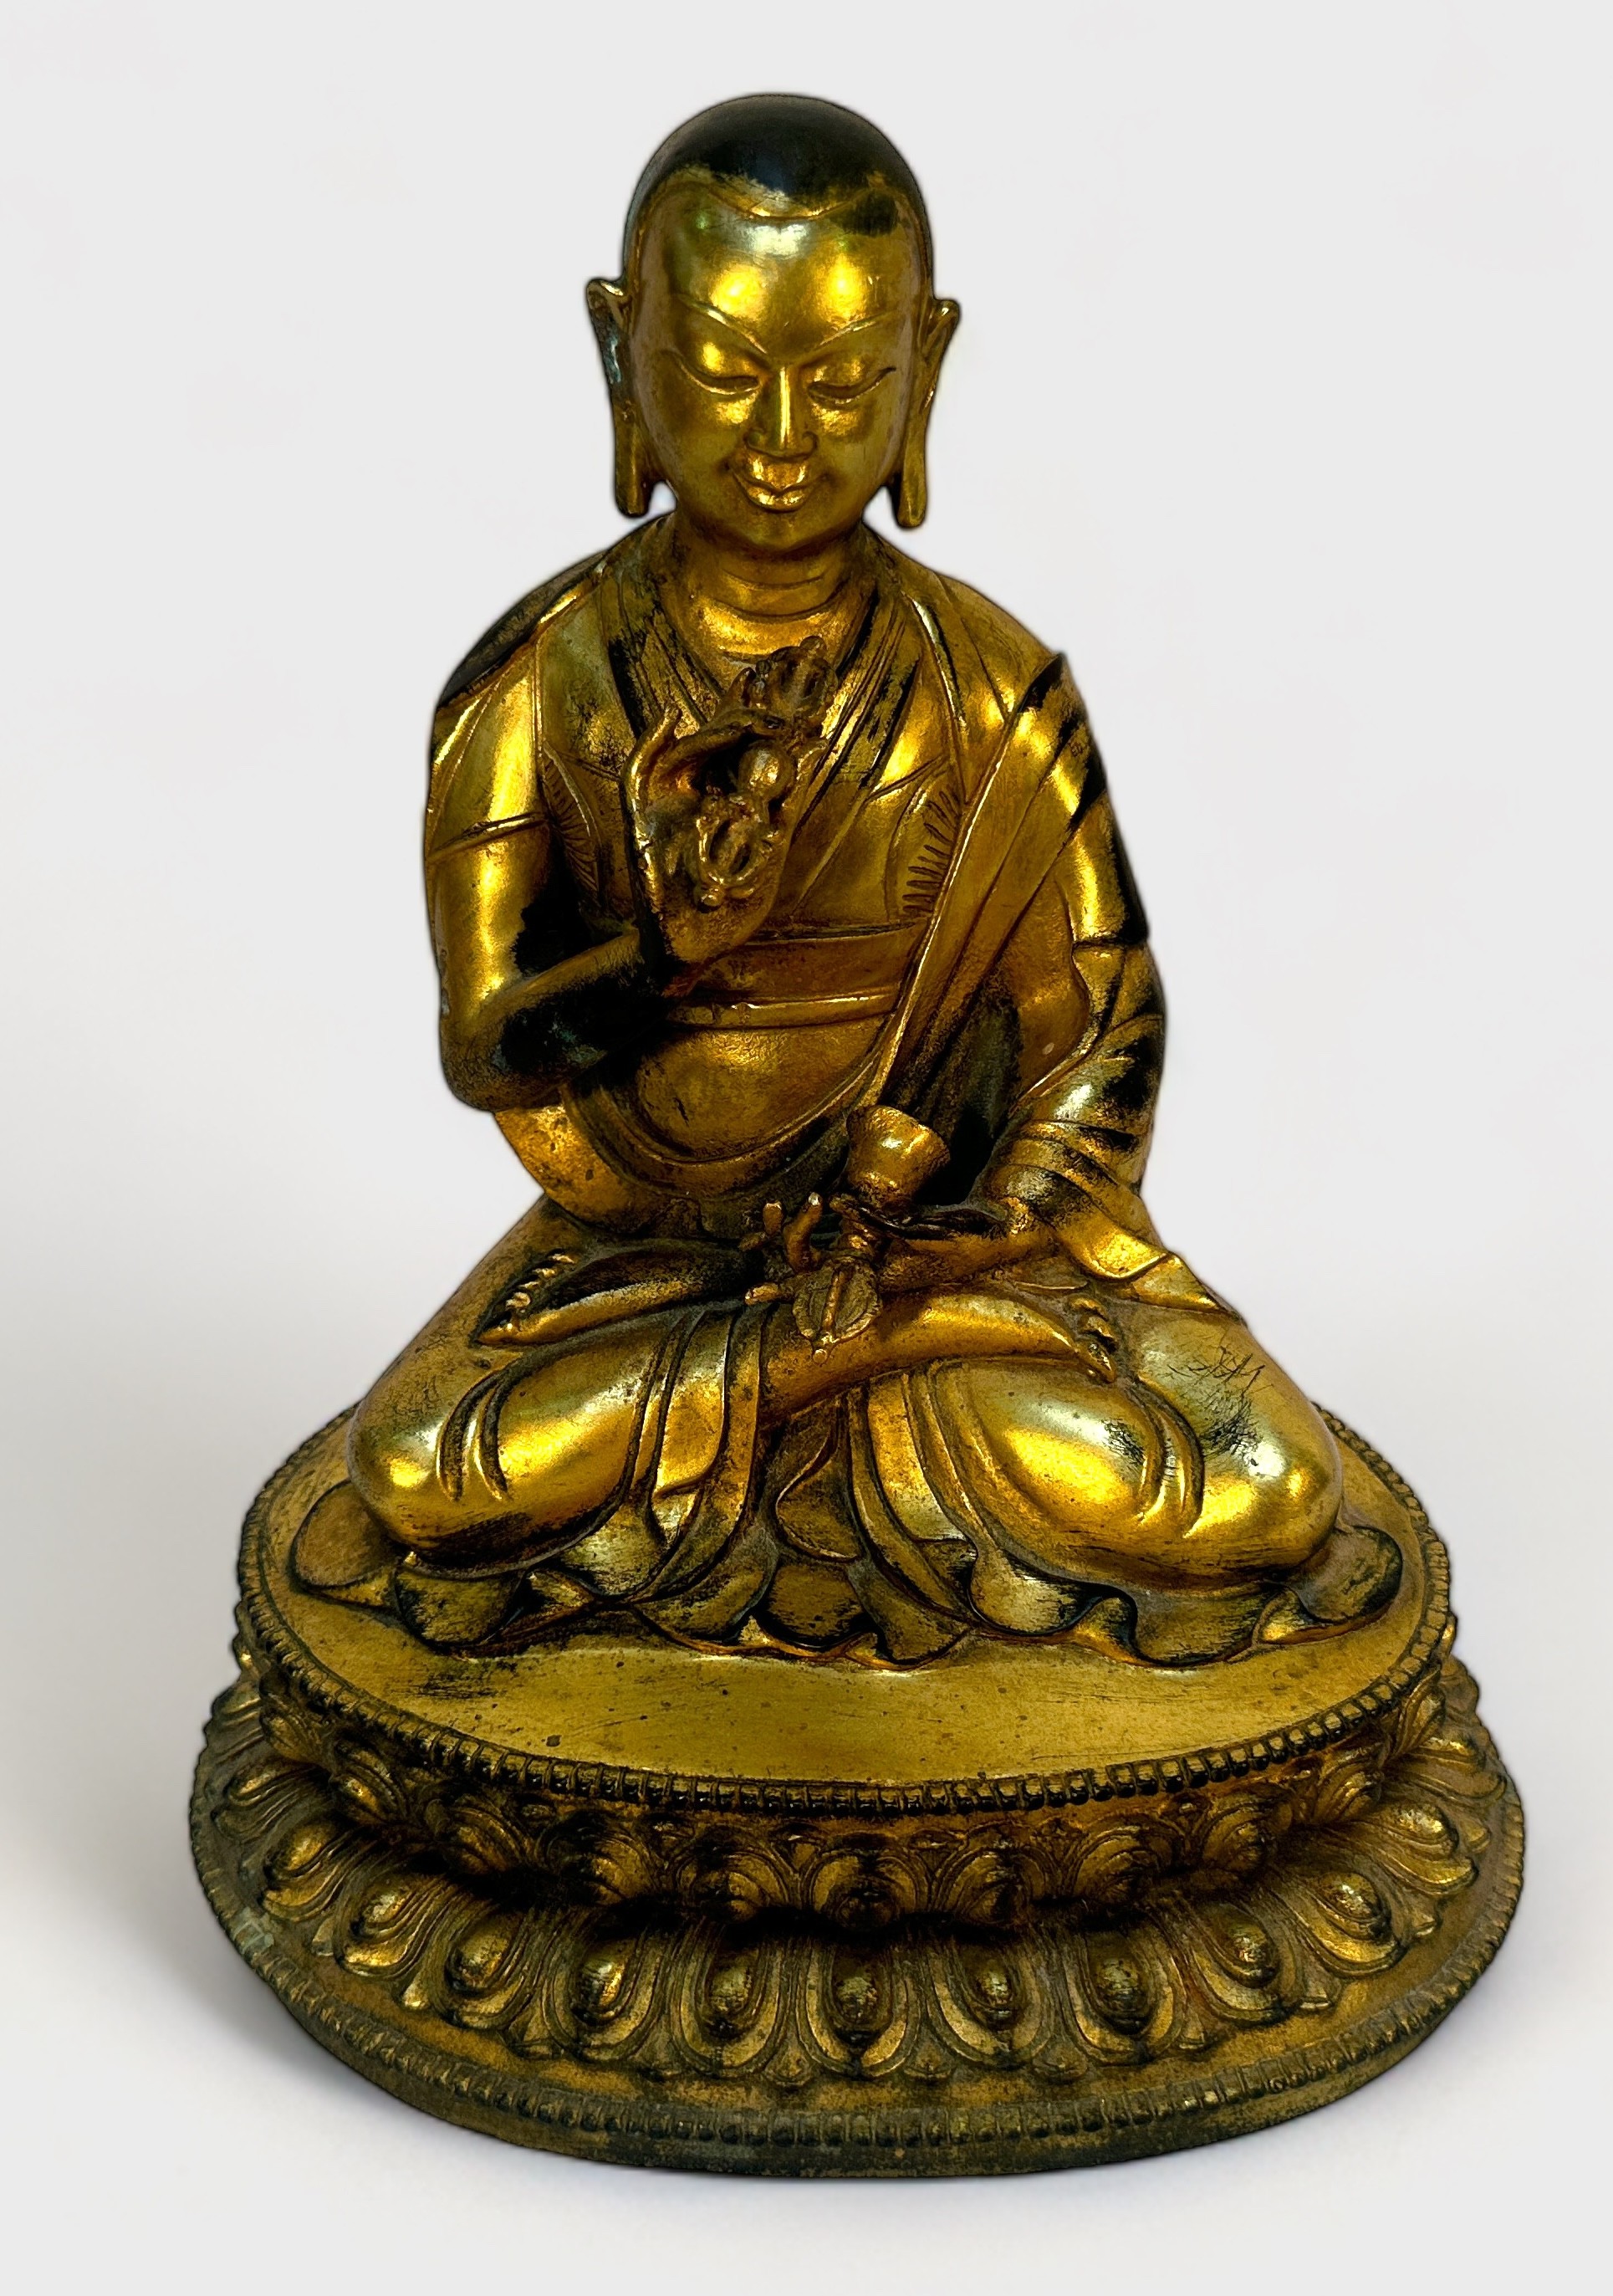 A Gilt-bronze Tibetan style Buddha, seated in lotus position and holding a vajra and meditiation